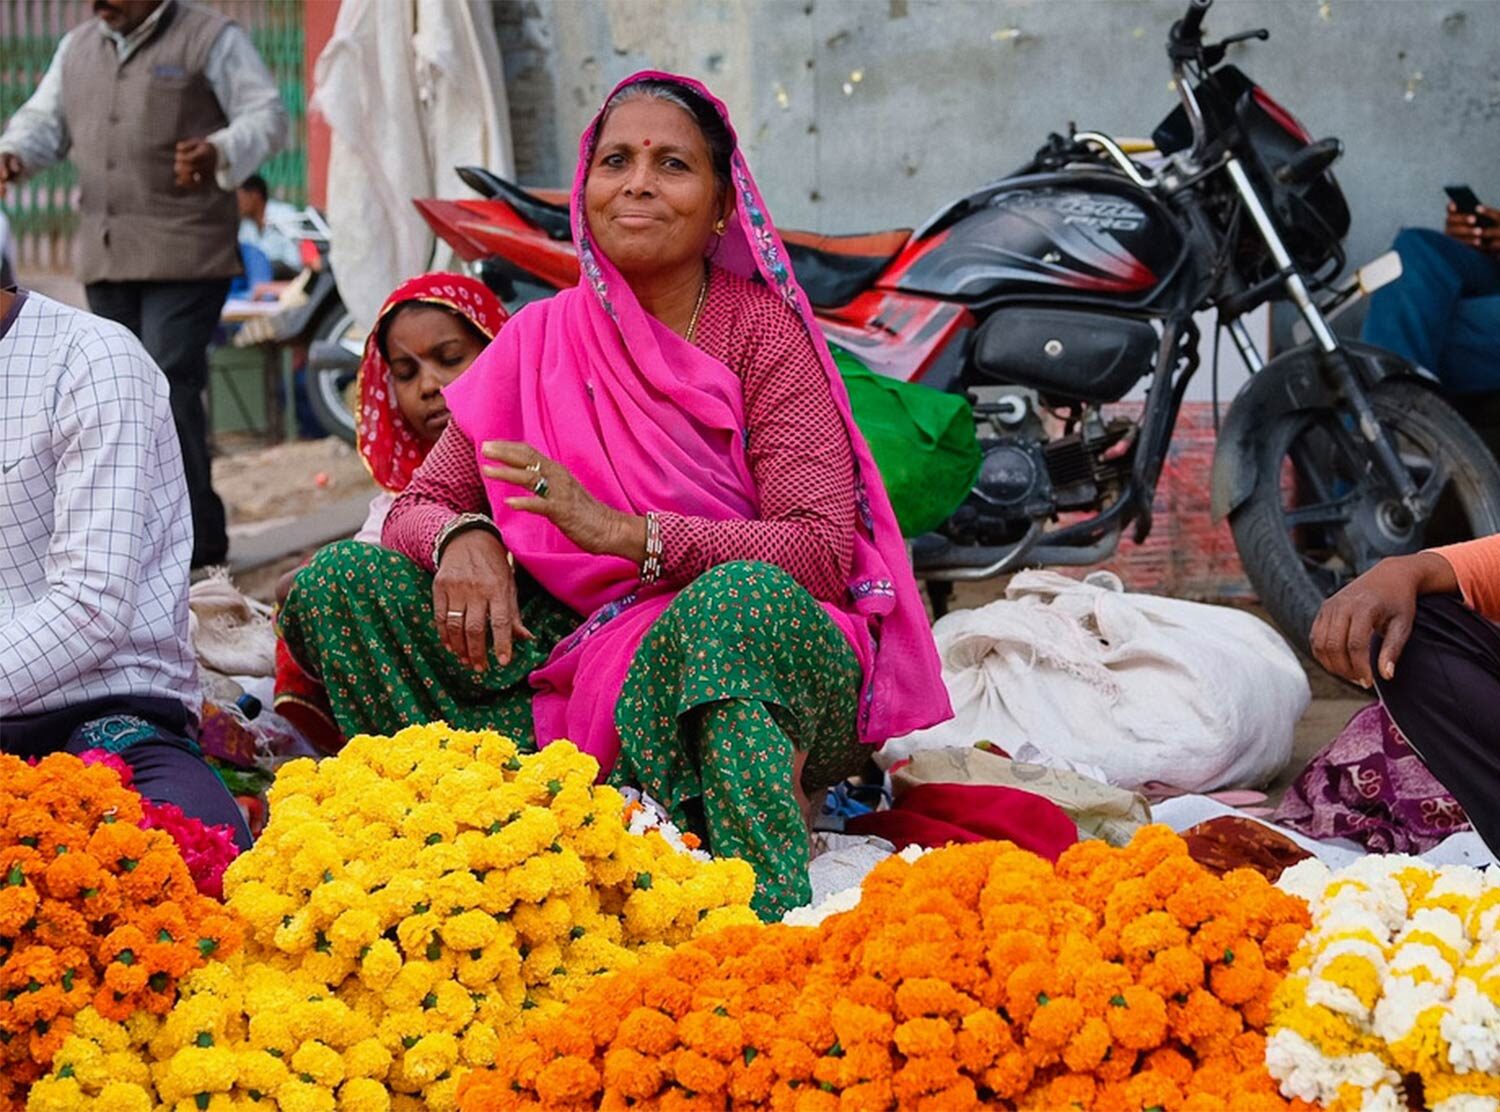 The Johri A beautiful lady at the flower market made me buy kgs of flowers and had me sitting in my hotel room wondering what to do with them. Okay, I did throw a few on my bed and played some old Bollywood tunes not gonna lie!